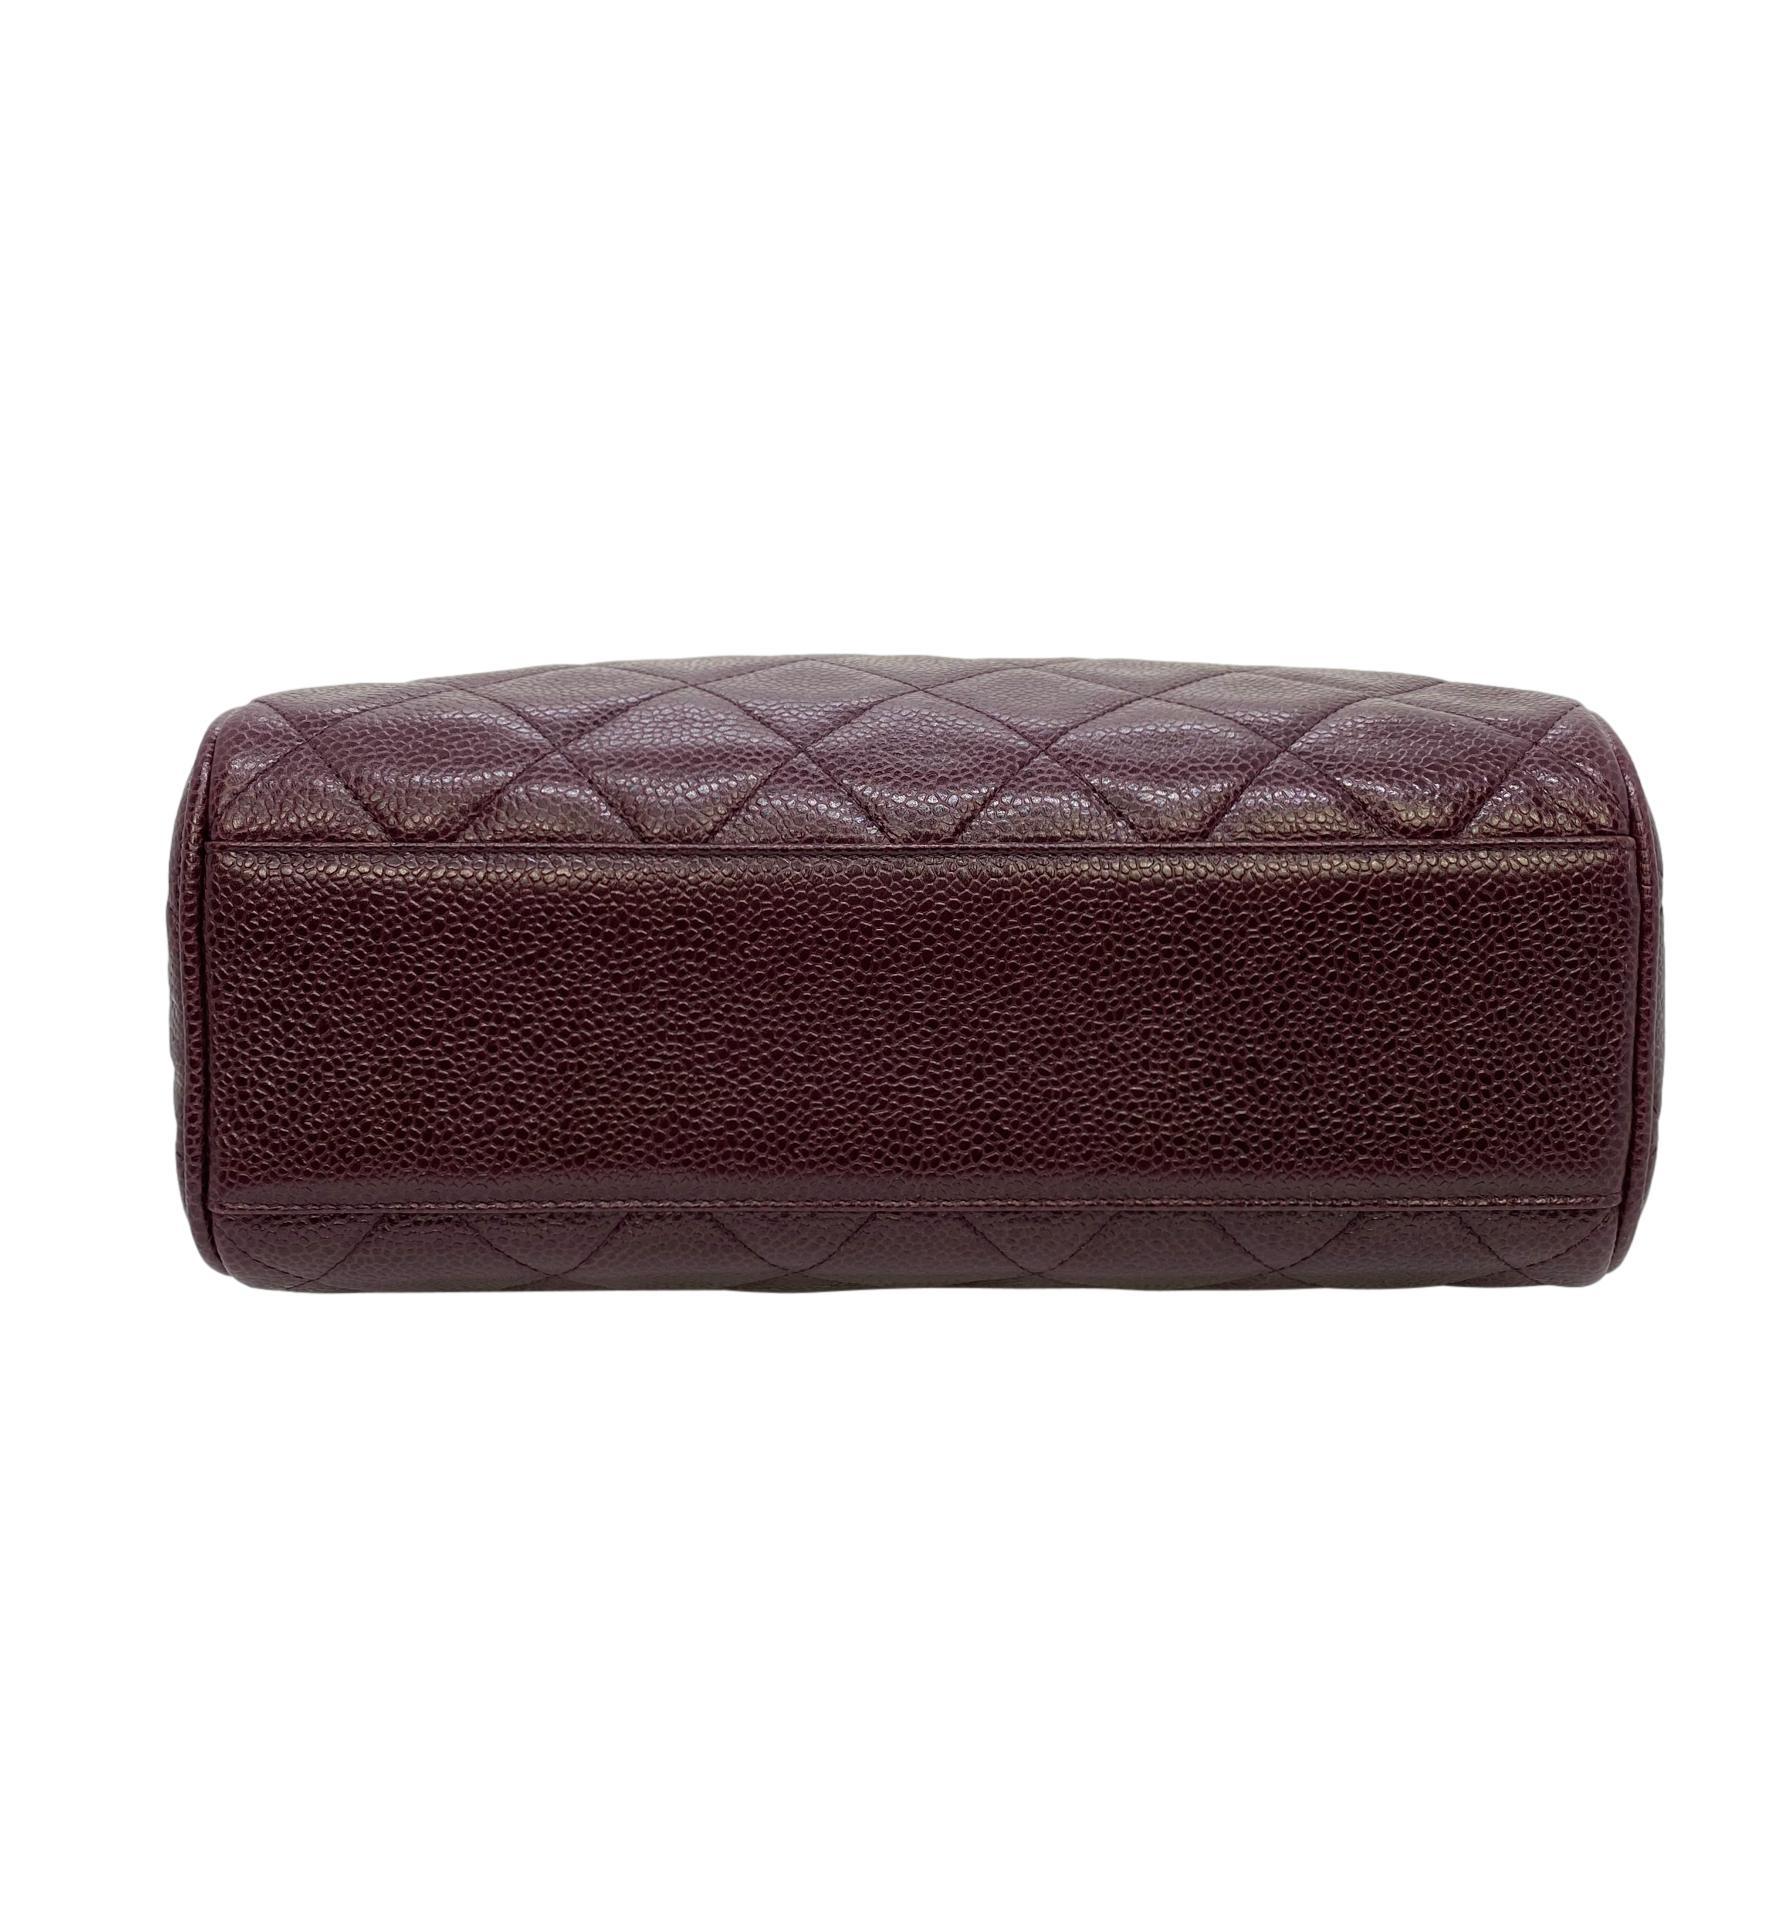 Black Chanel Vintage Burgundy Quilted Caviar Leather Camera Bag with Gold Hardware